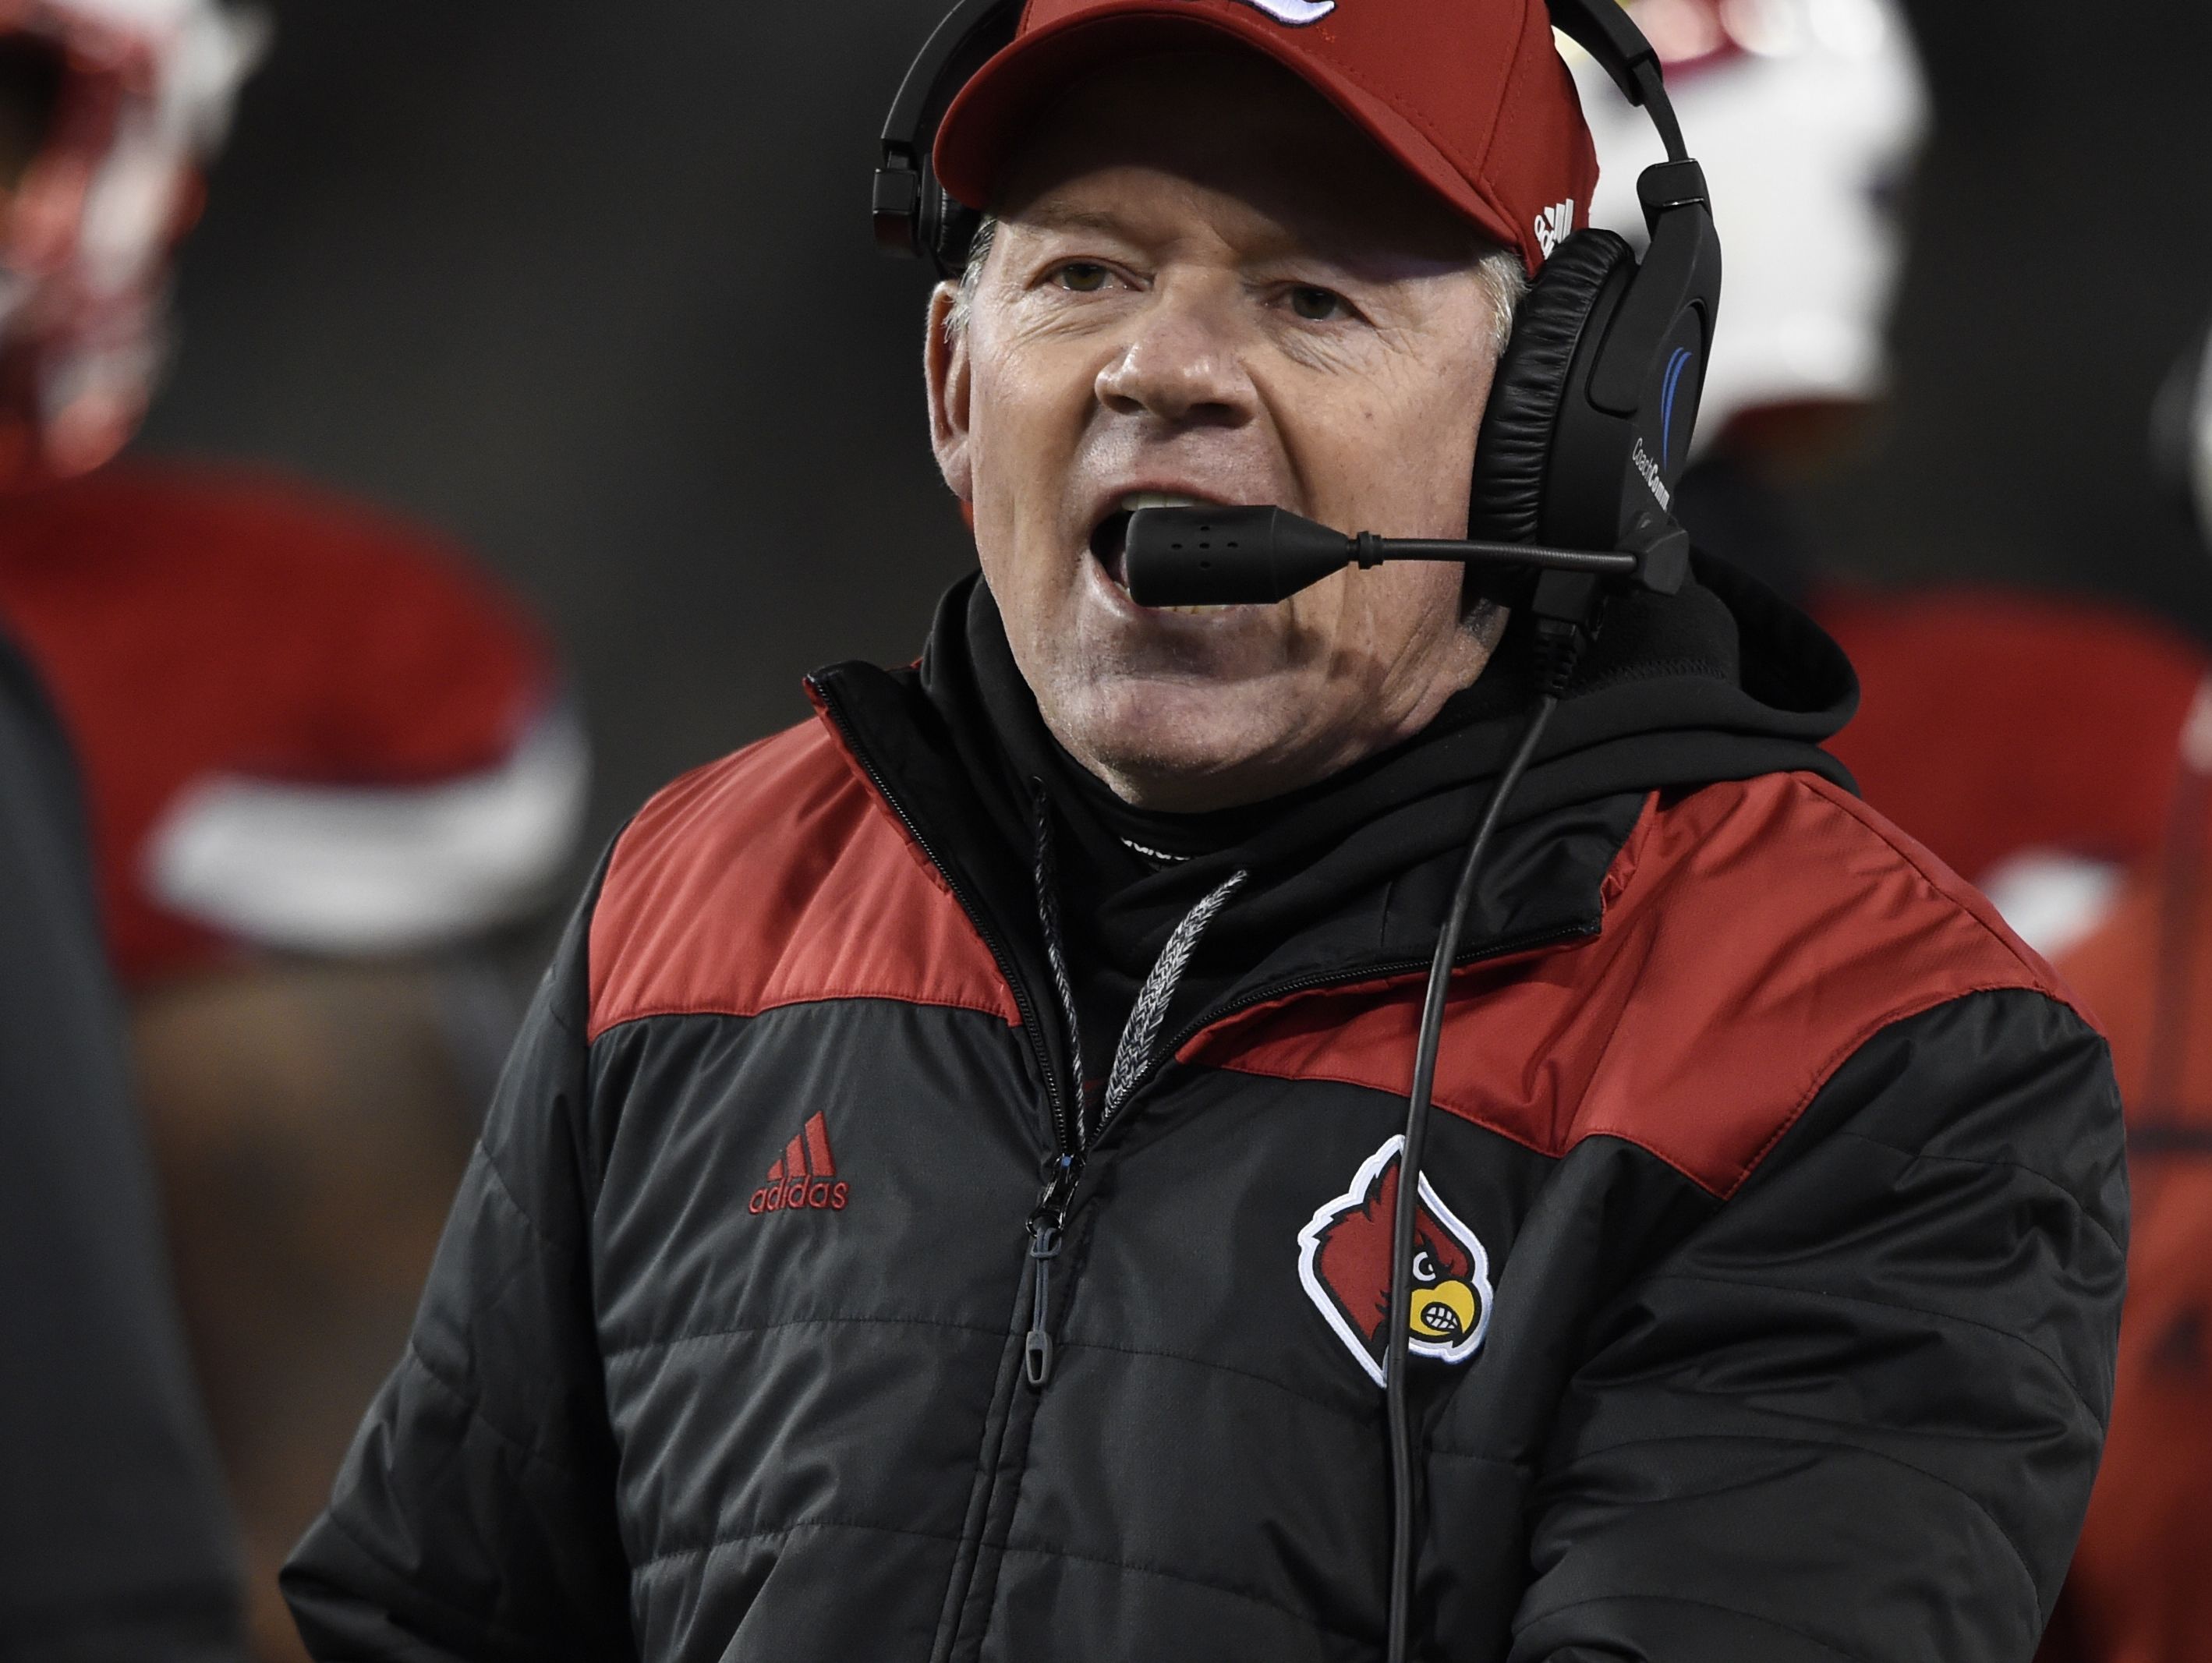 Louisville coach Bobby Petrino argues an official's call during the second quarter of their game against Texas A&M at the Franklin American Mortgage Music City Bowl at Nissan Stadium Wednesday Dec. 30, 2015, in Nashville, Tenn.